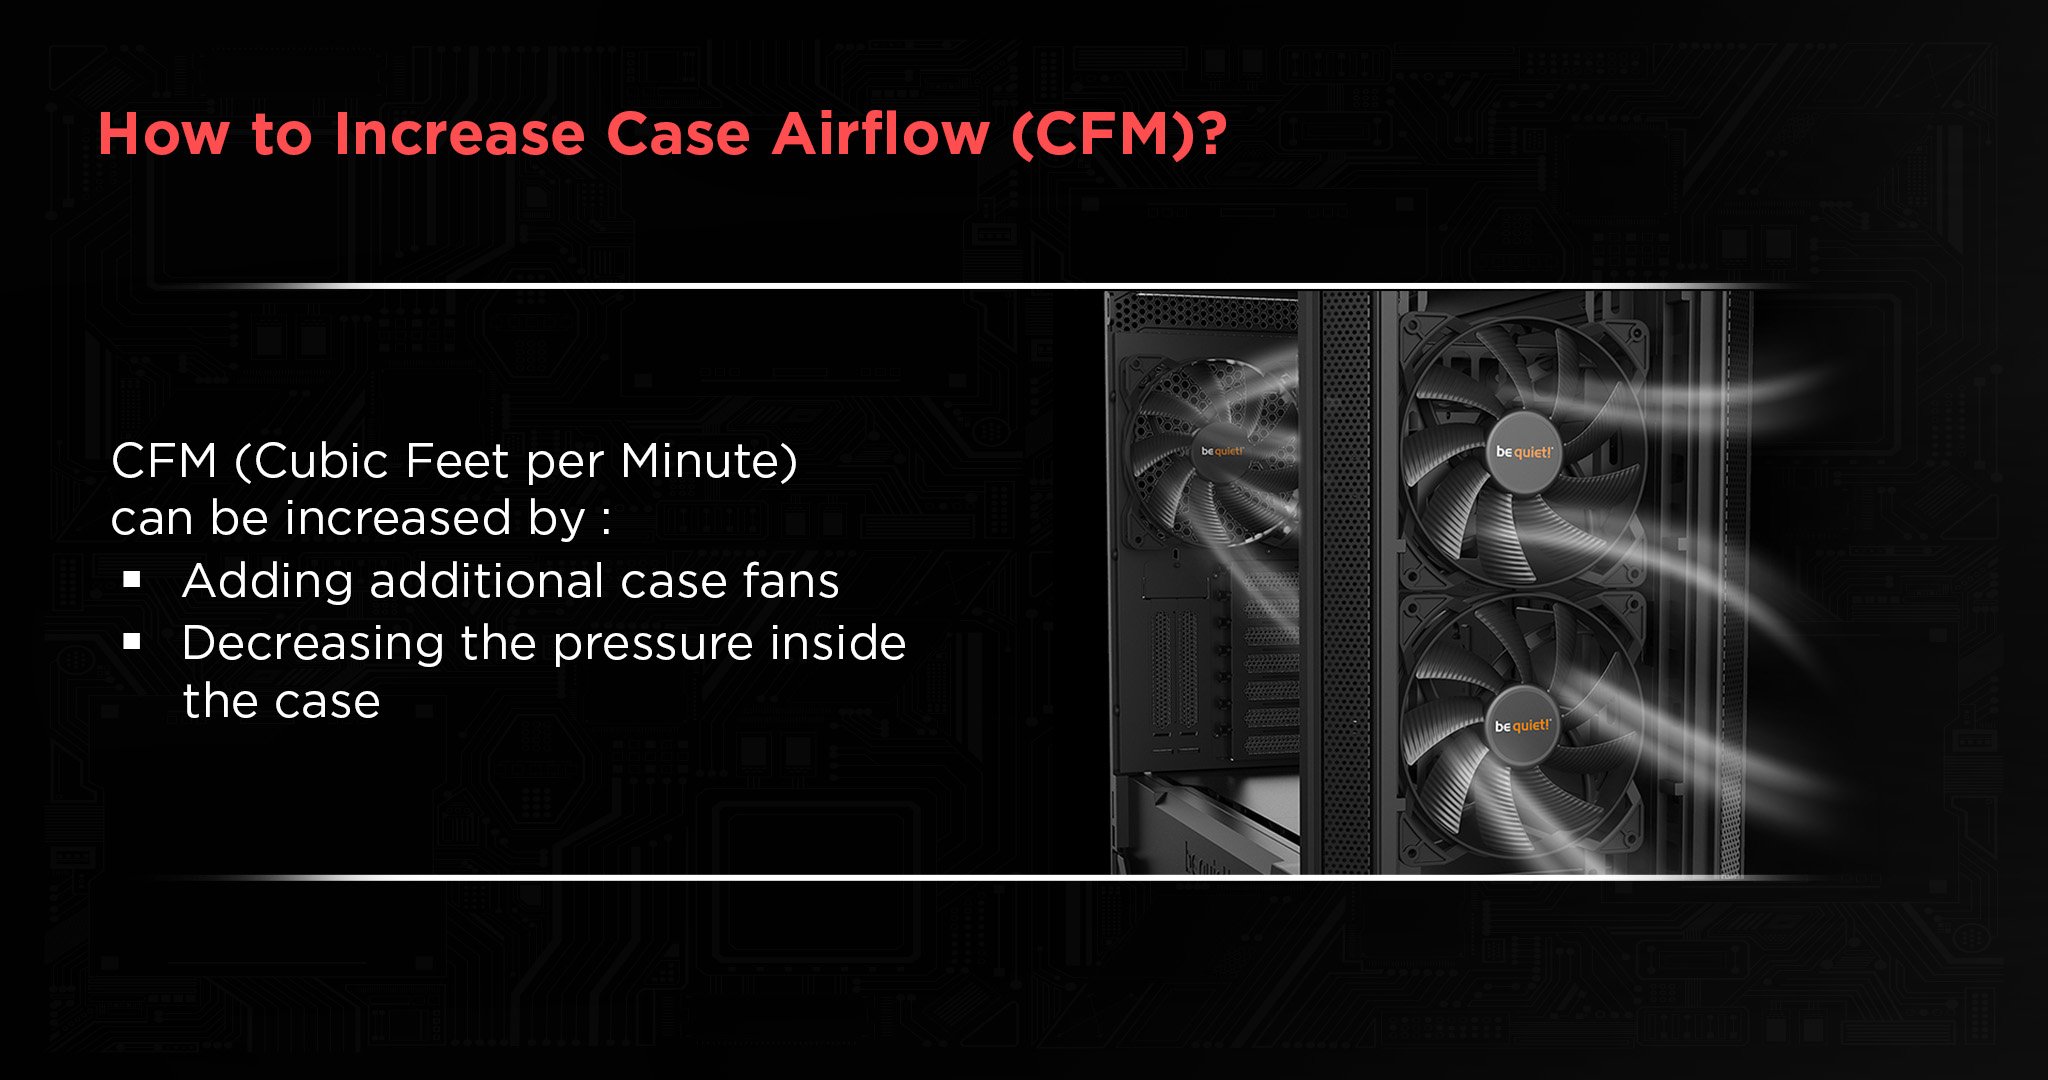 How to Increase Case Airflow (CFM)